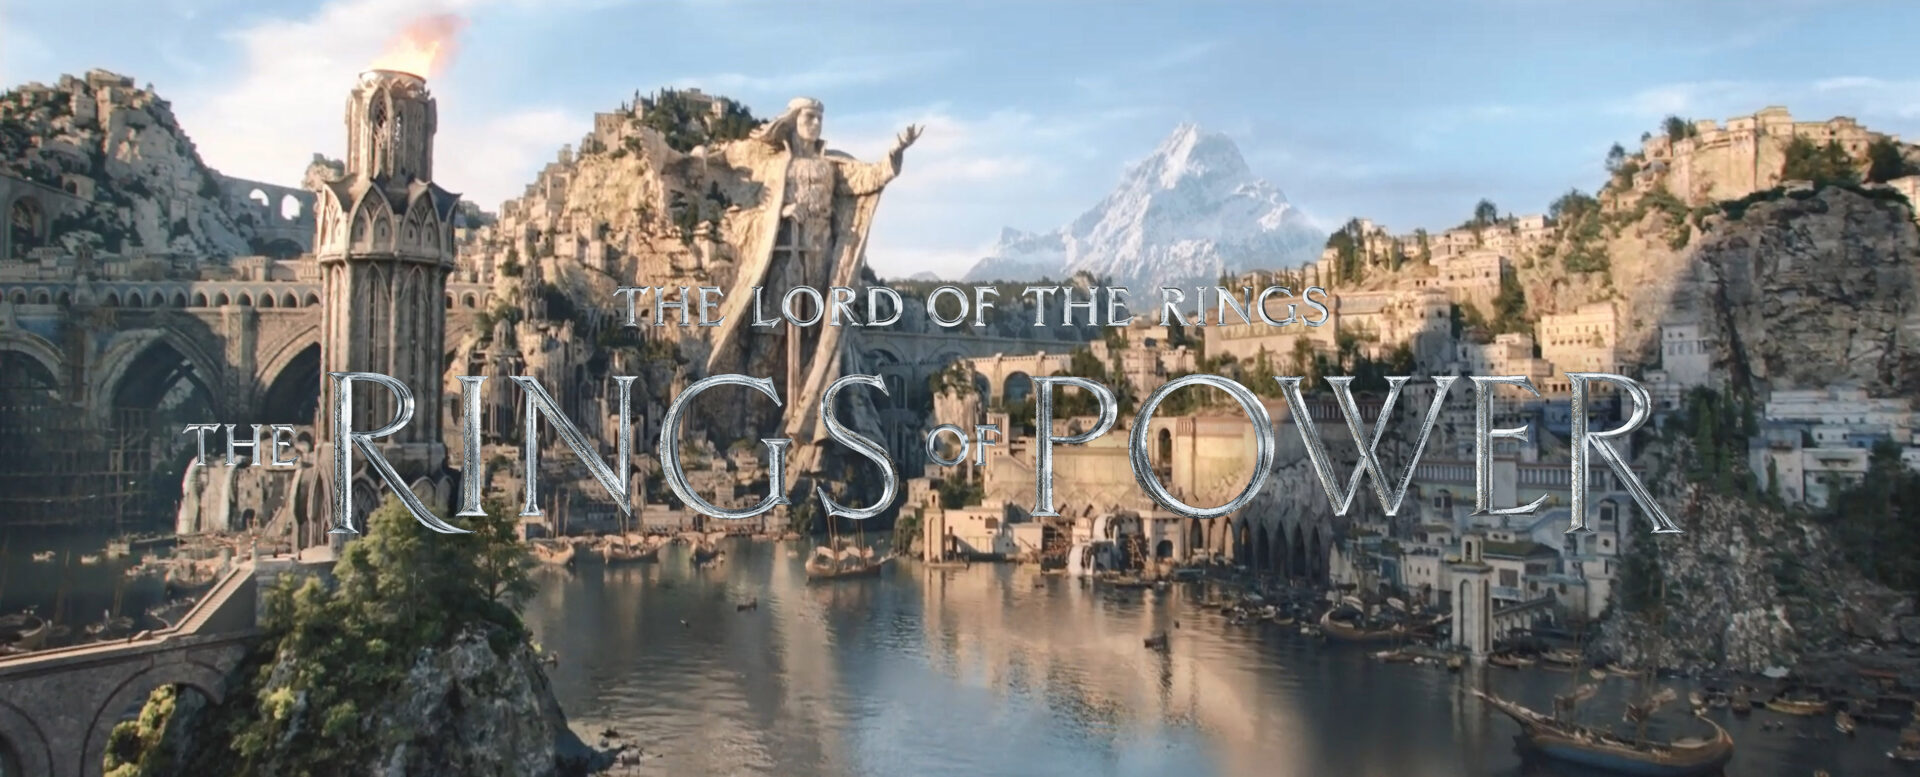 The Lord Of The Rings: The Rings Of Power Final Trailer Released Ahead Of  Series Premiere - Filmibeat